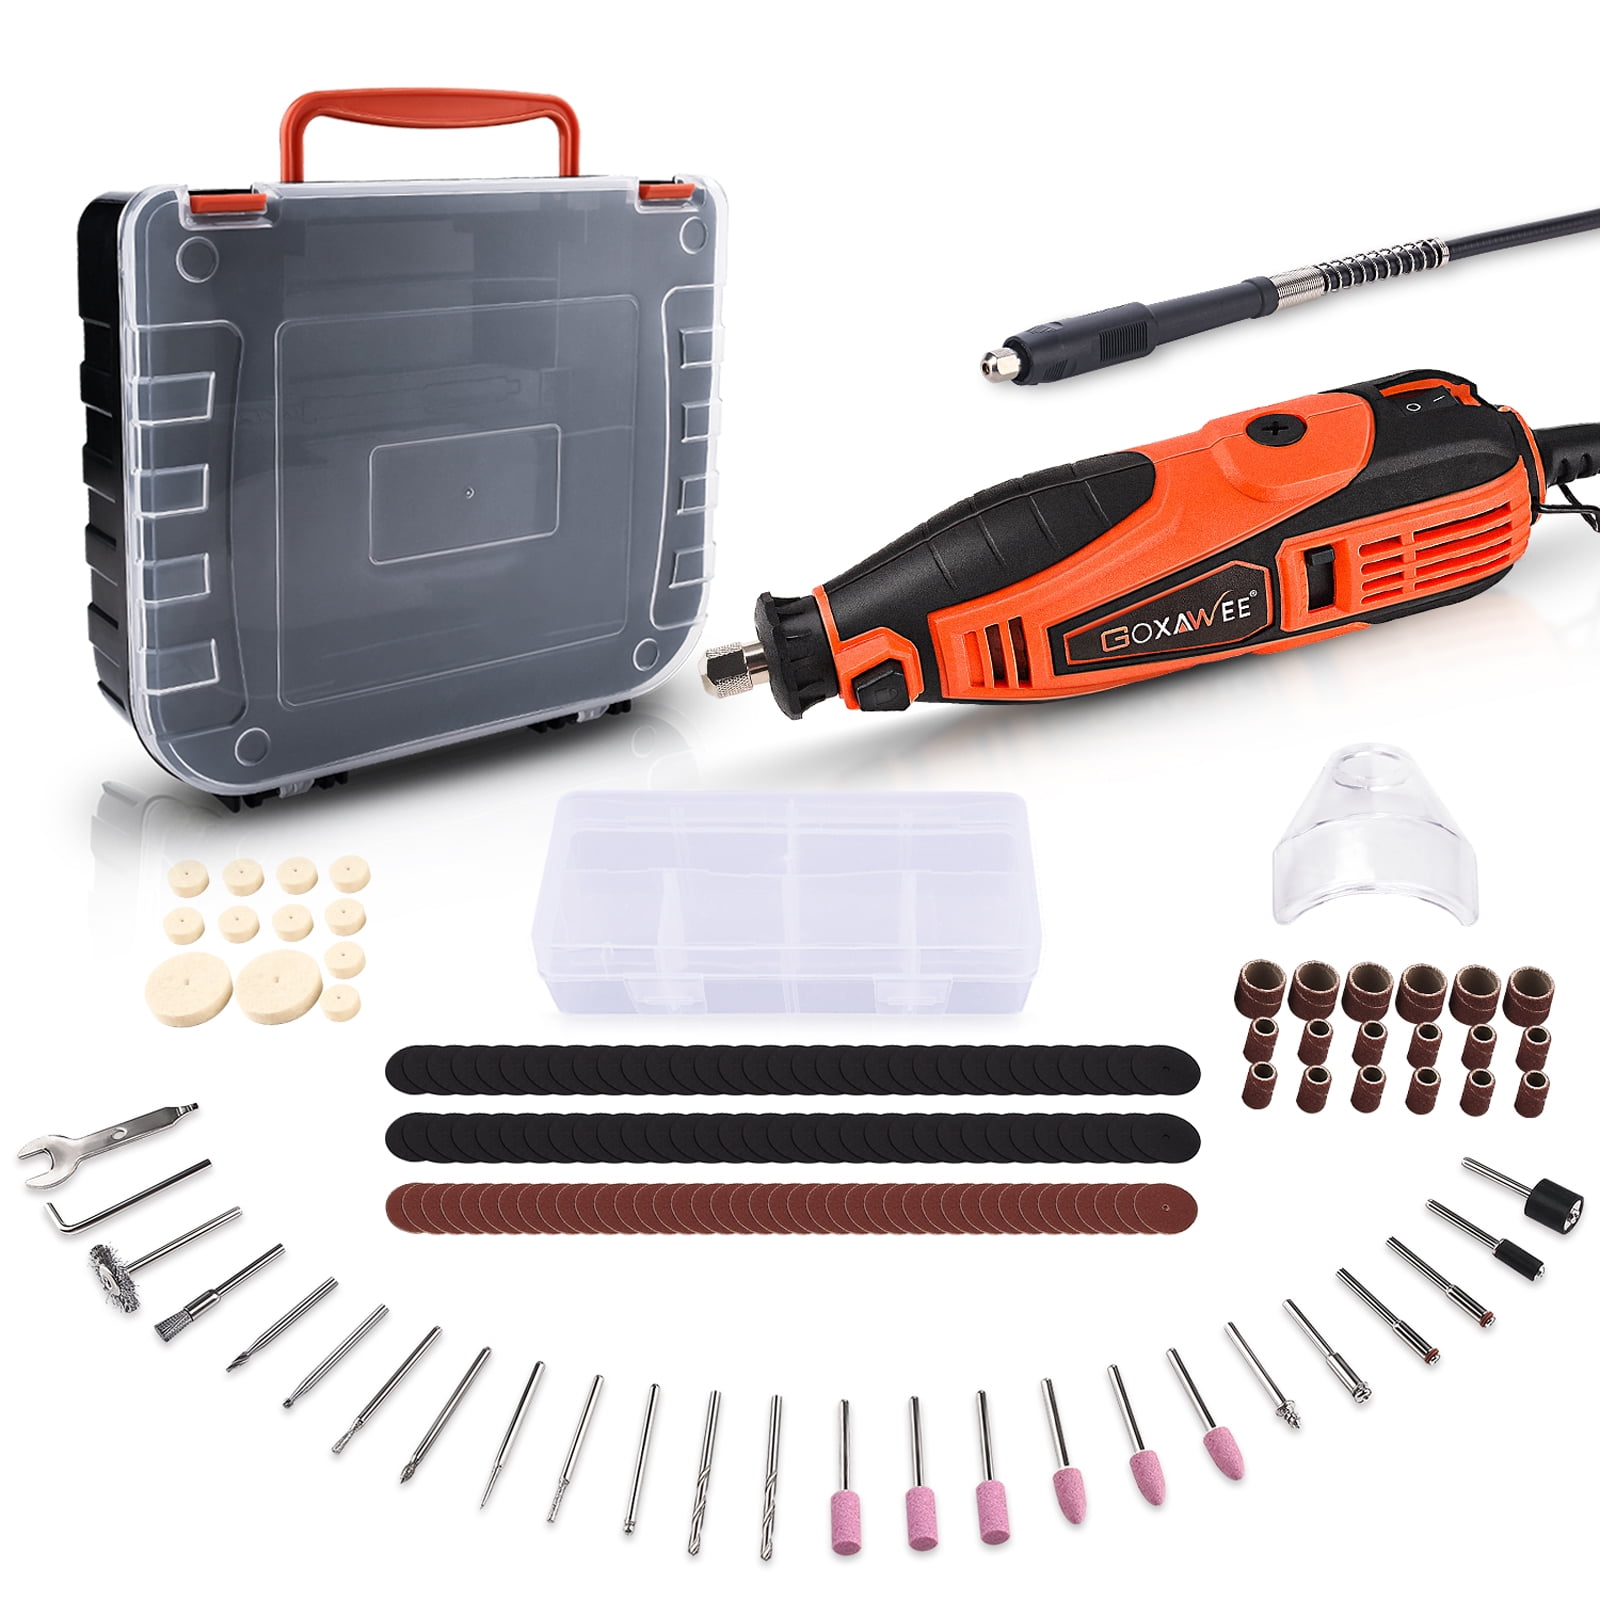 Rotary Tool Kit with 180 Rotary Tool Accessories & Flex Shaft & Universal Collet, 5 Variable Speed Rotary Multi-Tool, Mini Electric Drill Set for Crafting Project - Walmart.com